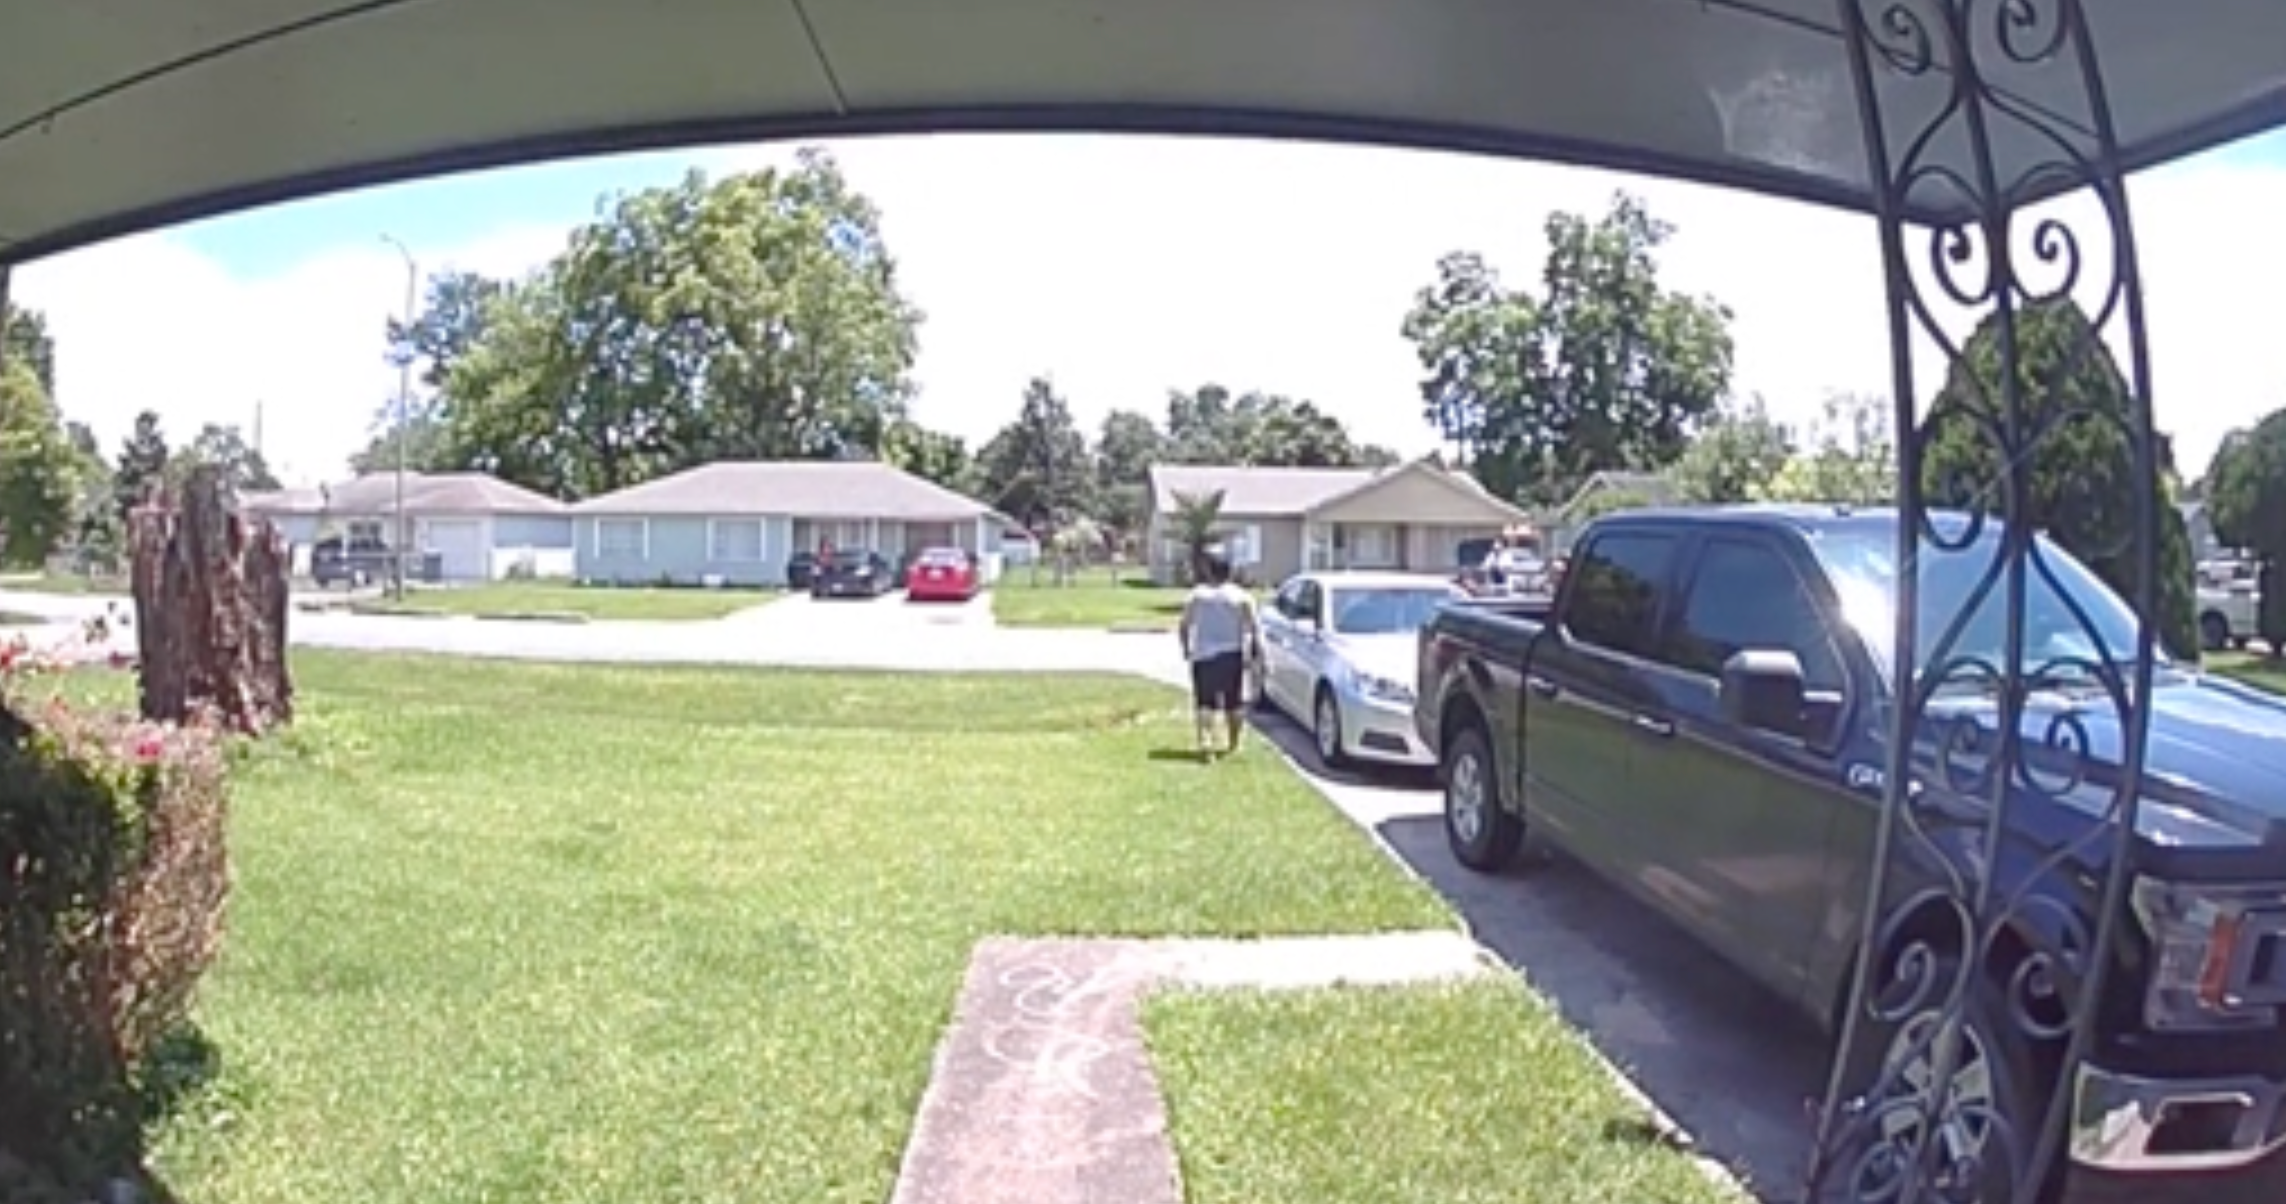 Video has come to light of the moment a mother shot her son while aiming for a neighbour’s dog